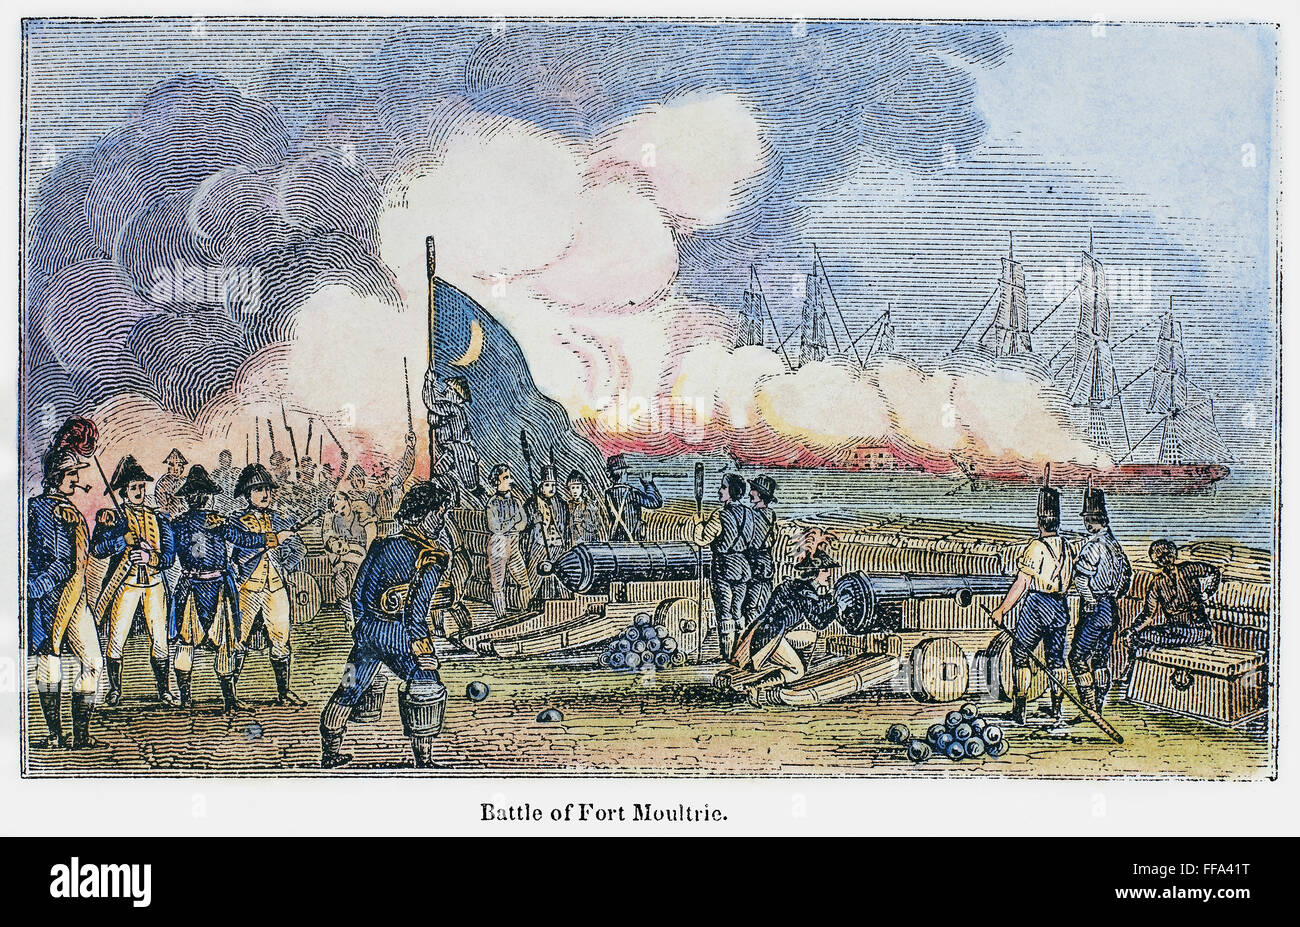 FORT MOULTRIE BATTLE, 1776. /nThe guns of Fort Moultrie on Sullivan's Island, near Charleston, South Carolina, repelling a British squadron on 28 June 1776. Wood engraving, American, 1844. Stock Photo